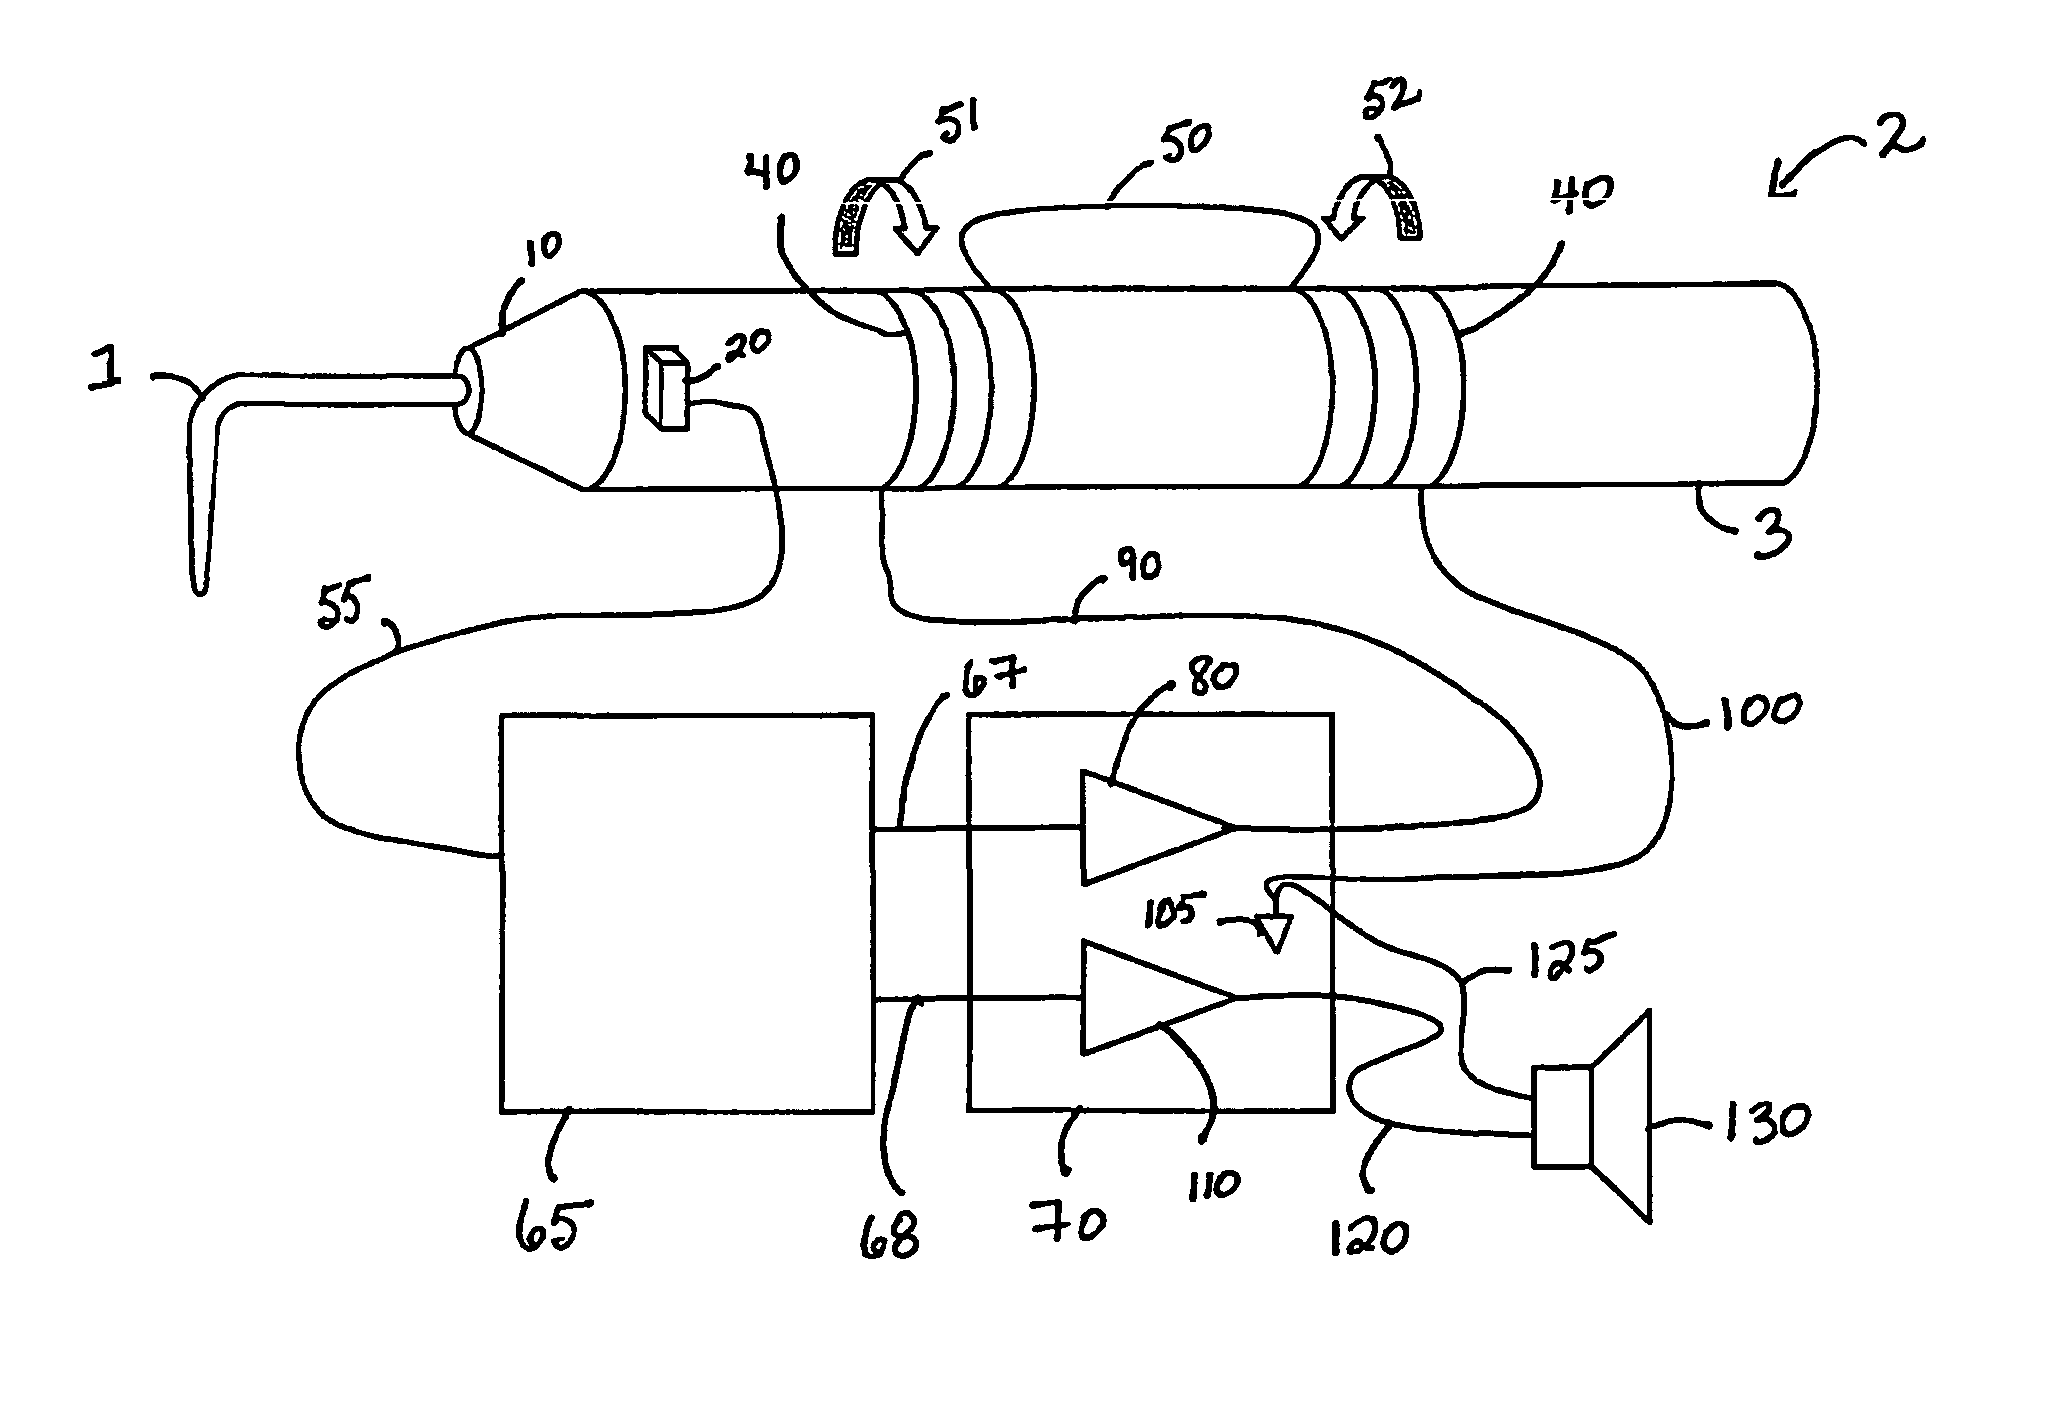 Tactile amplification instrument and method of use